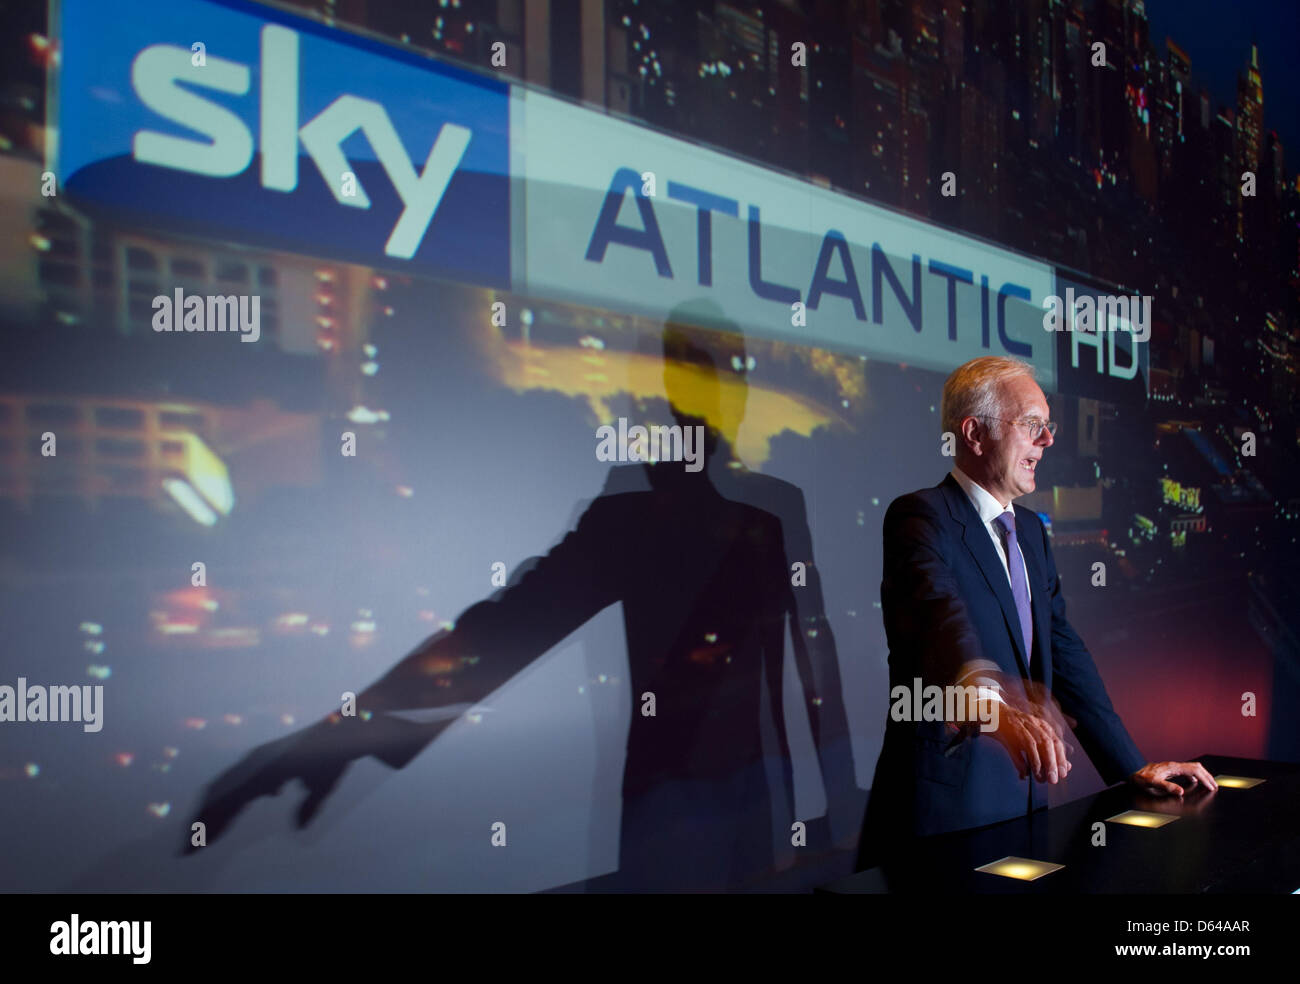 The entertainer and moderator Harald Schmidt, attends the presentation of the new pay tv platform Sky Atlantic HD in Hamburg, Germany, 23 May 2012. The new HD channel brings the US channel HBO to Germany. Photo: Christian Charisius Stock Photo